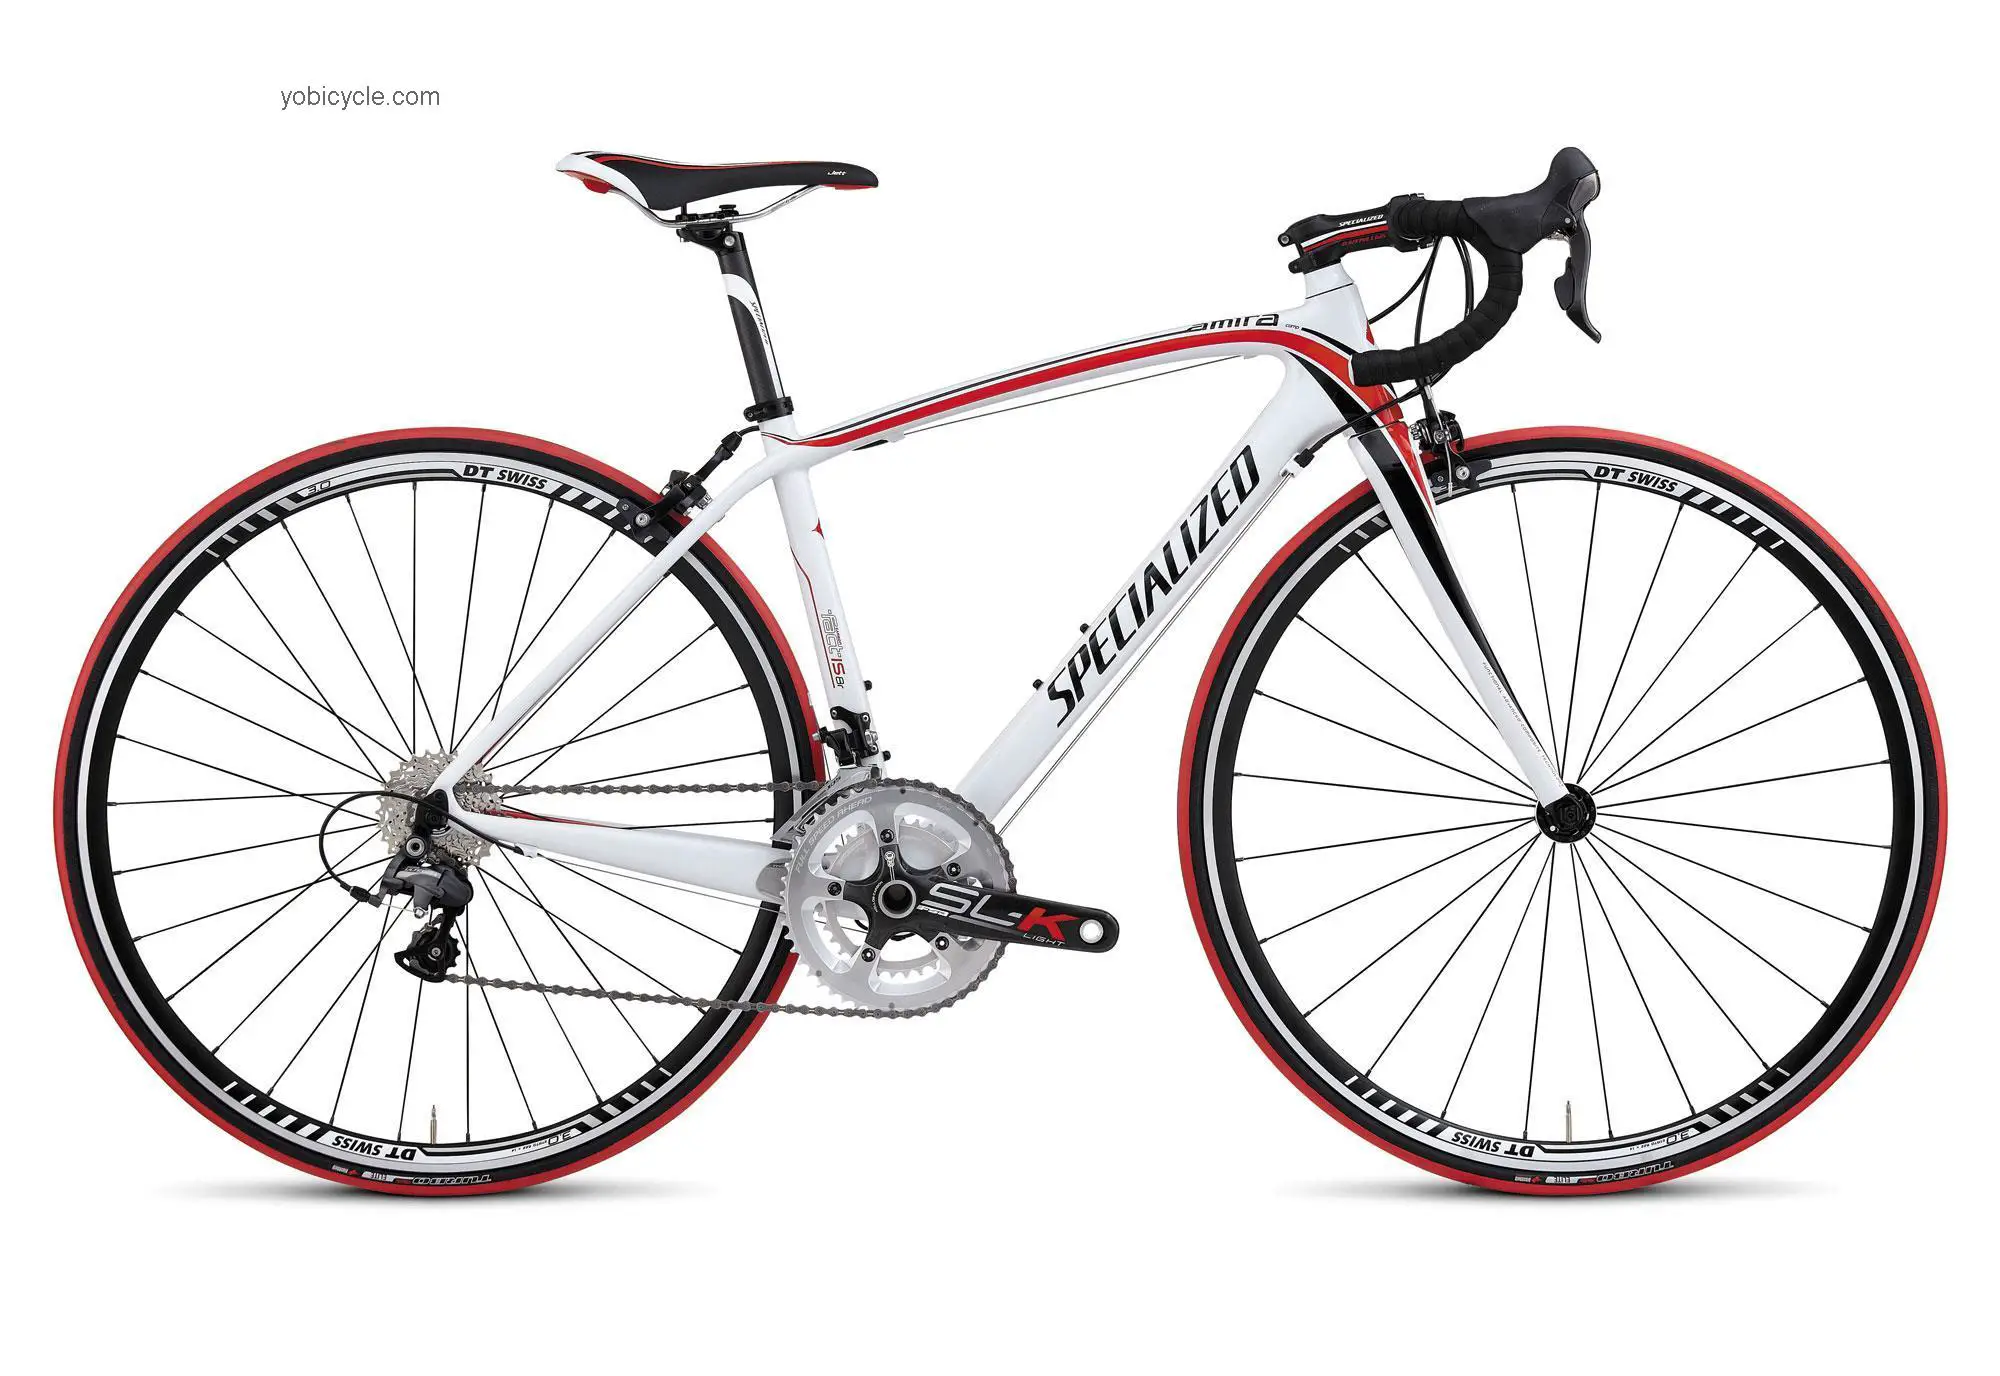 Specialized Amira Comp Compact 2012 comparison online with competitors